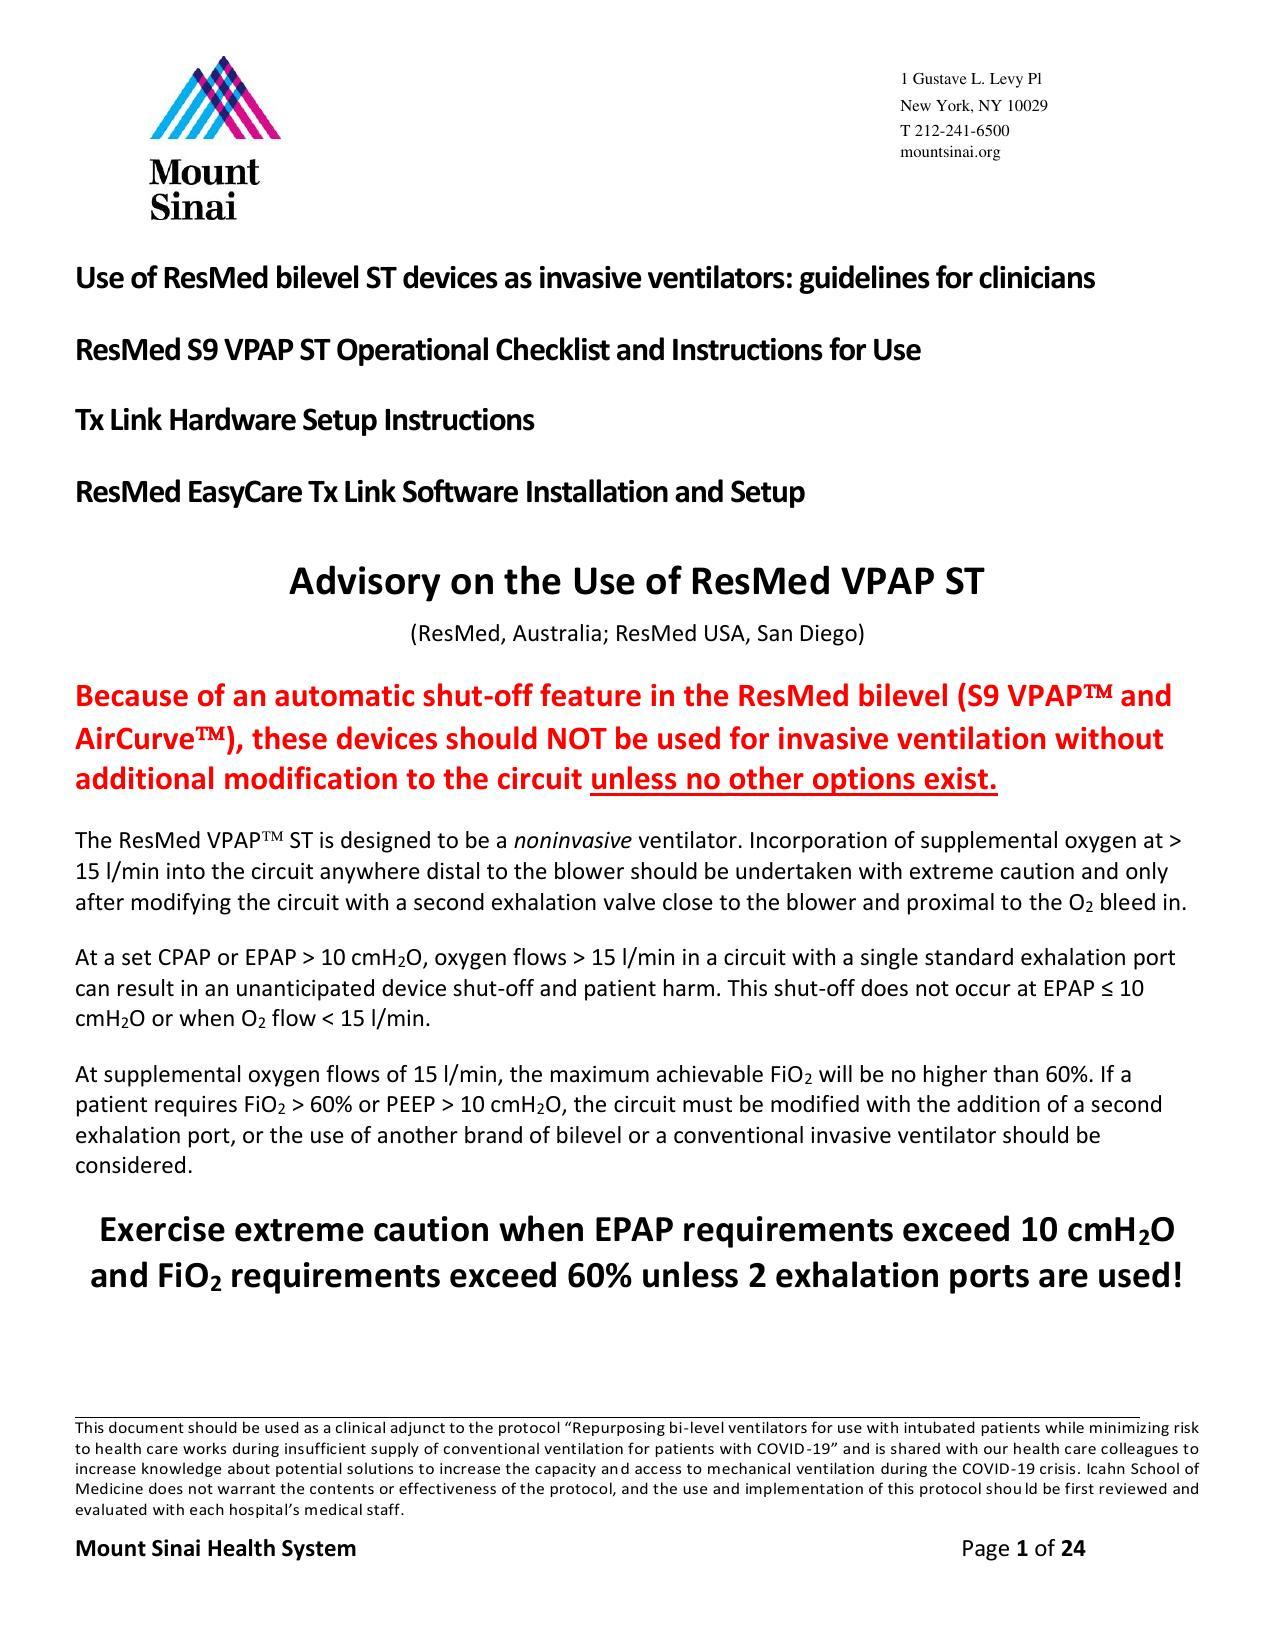 clinician-guidelines-resmed-vpap-st-version-30.pdf